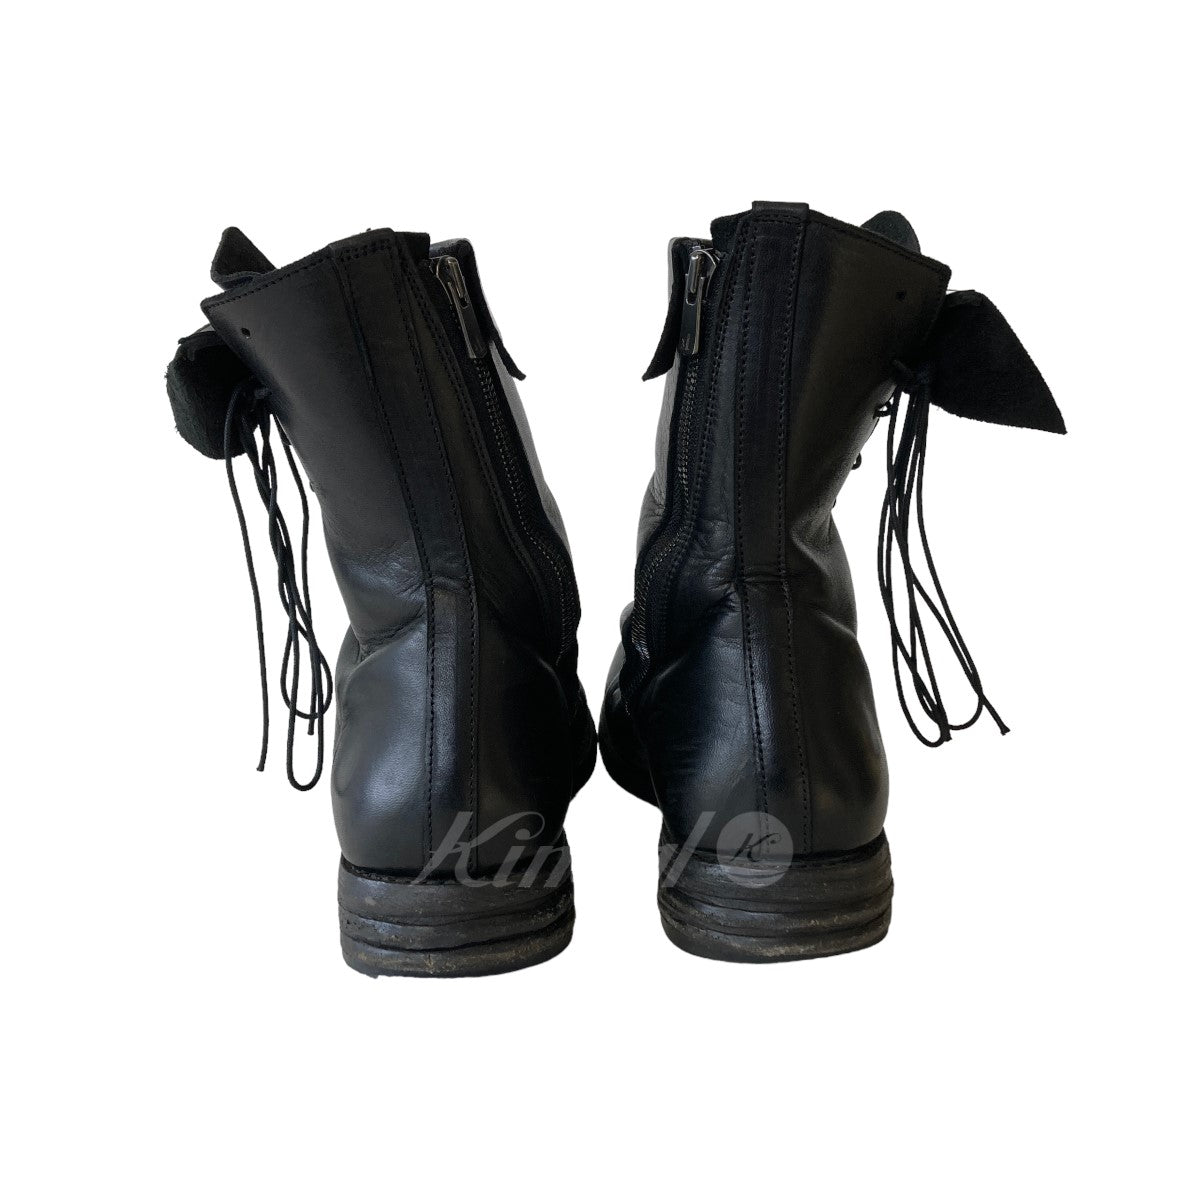 Portaille(ポルタユ) prtl x 4R4s exclusive Twisted Boots ブラック ...